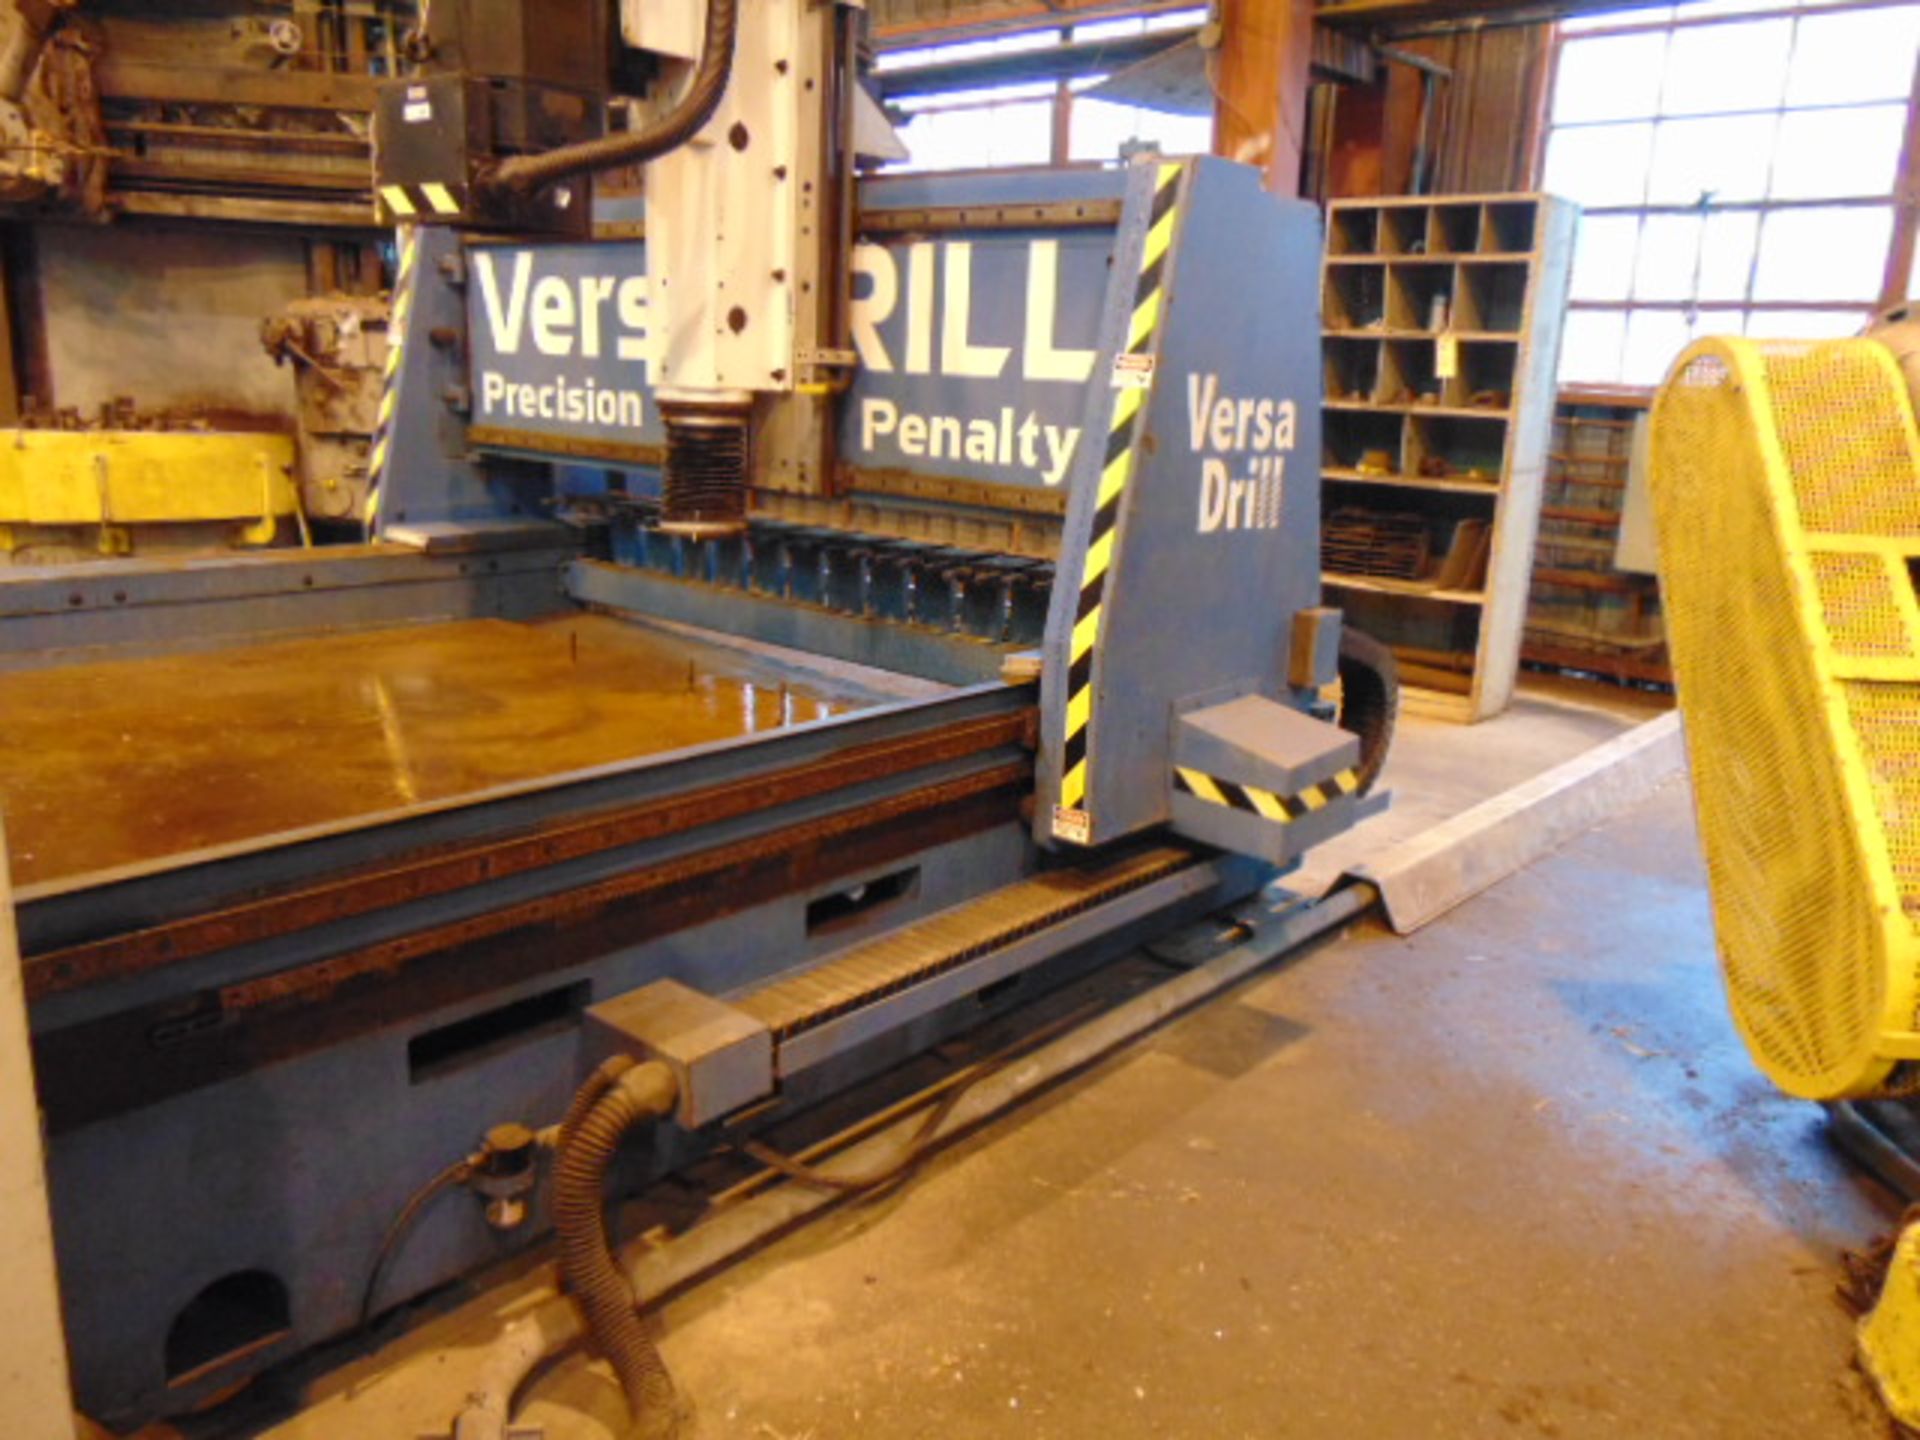 CNC TUBE SHEET DRILLING MACHINE, VERSADRILL MDL. HD-7272, new 2002, 72” X-axis travel, 72” Y-axis - Image 4 of 7